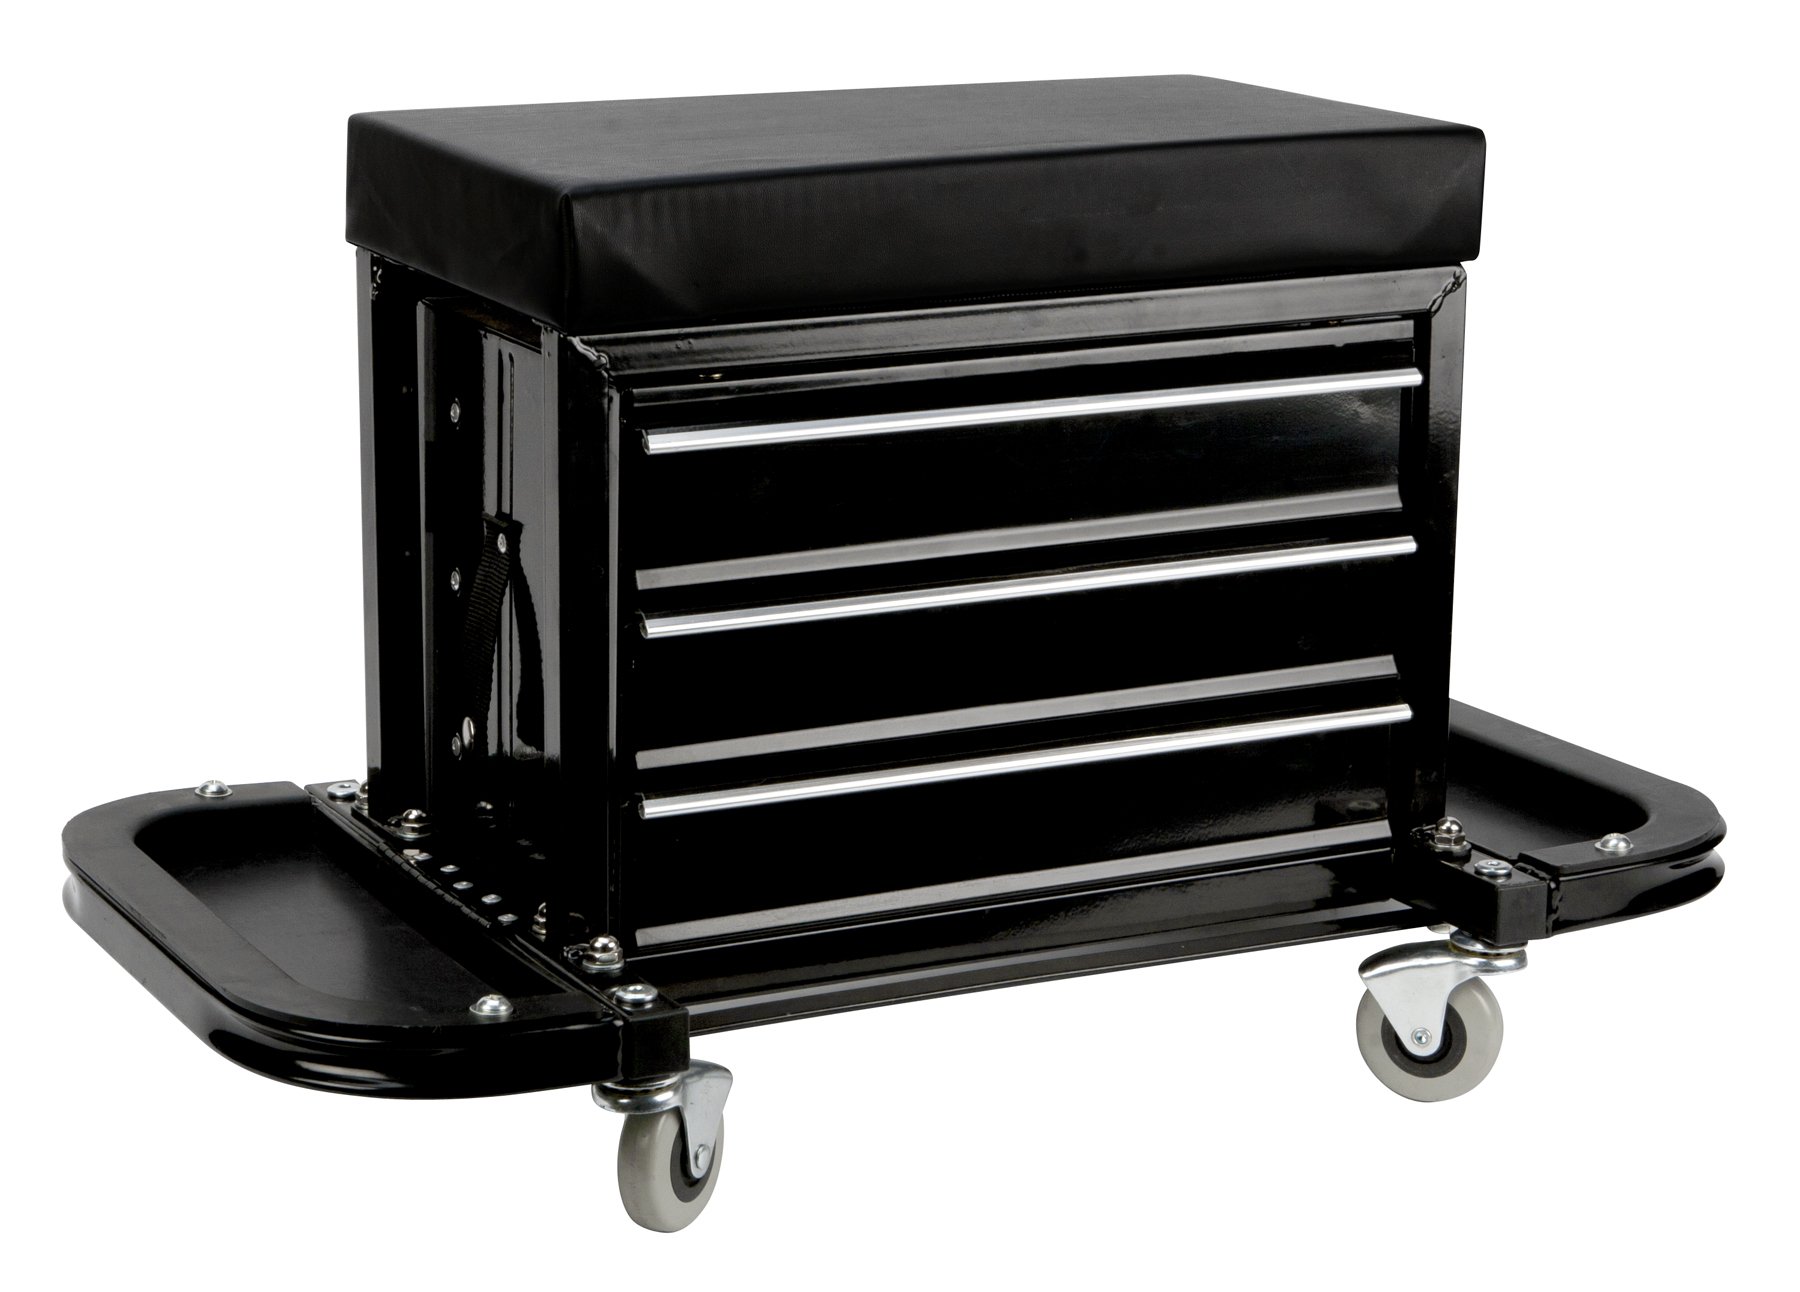 HPDMC Rolling Tool Chest/Tool Box Padded Mechanic Stool Creeper Seat with 3 Drawers and Wheels Black 